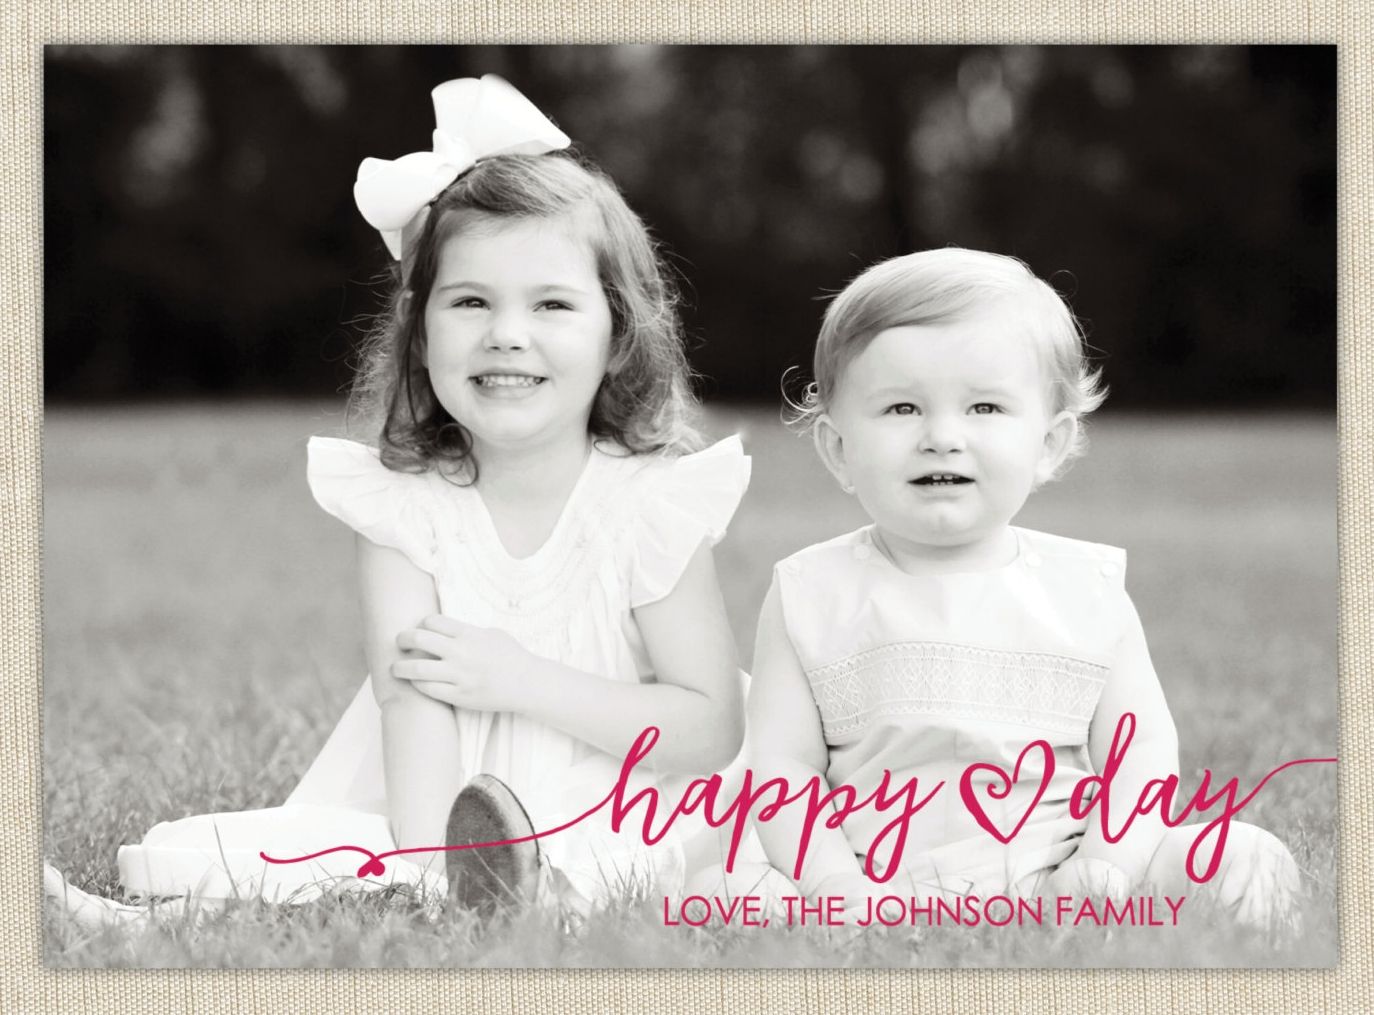 A sweet and simple Valentine's Day photo card by Brown Paper Studios.